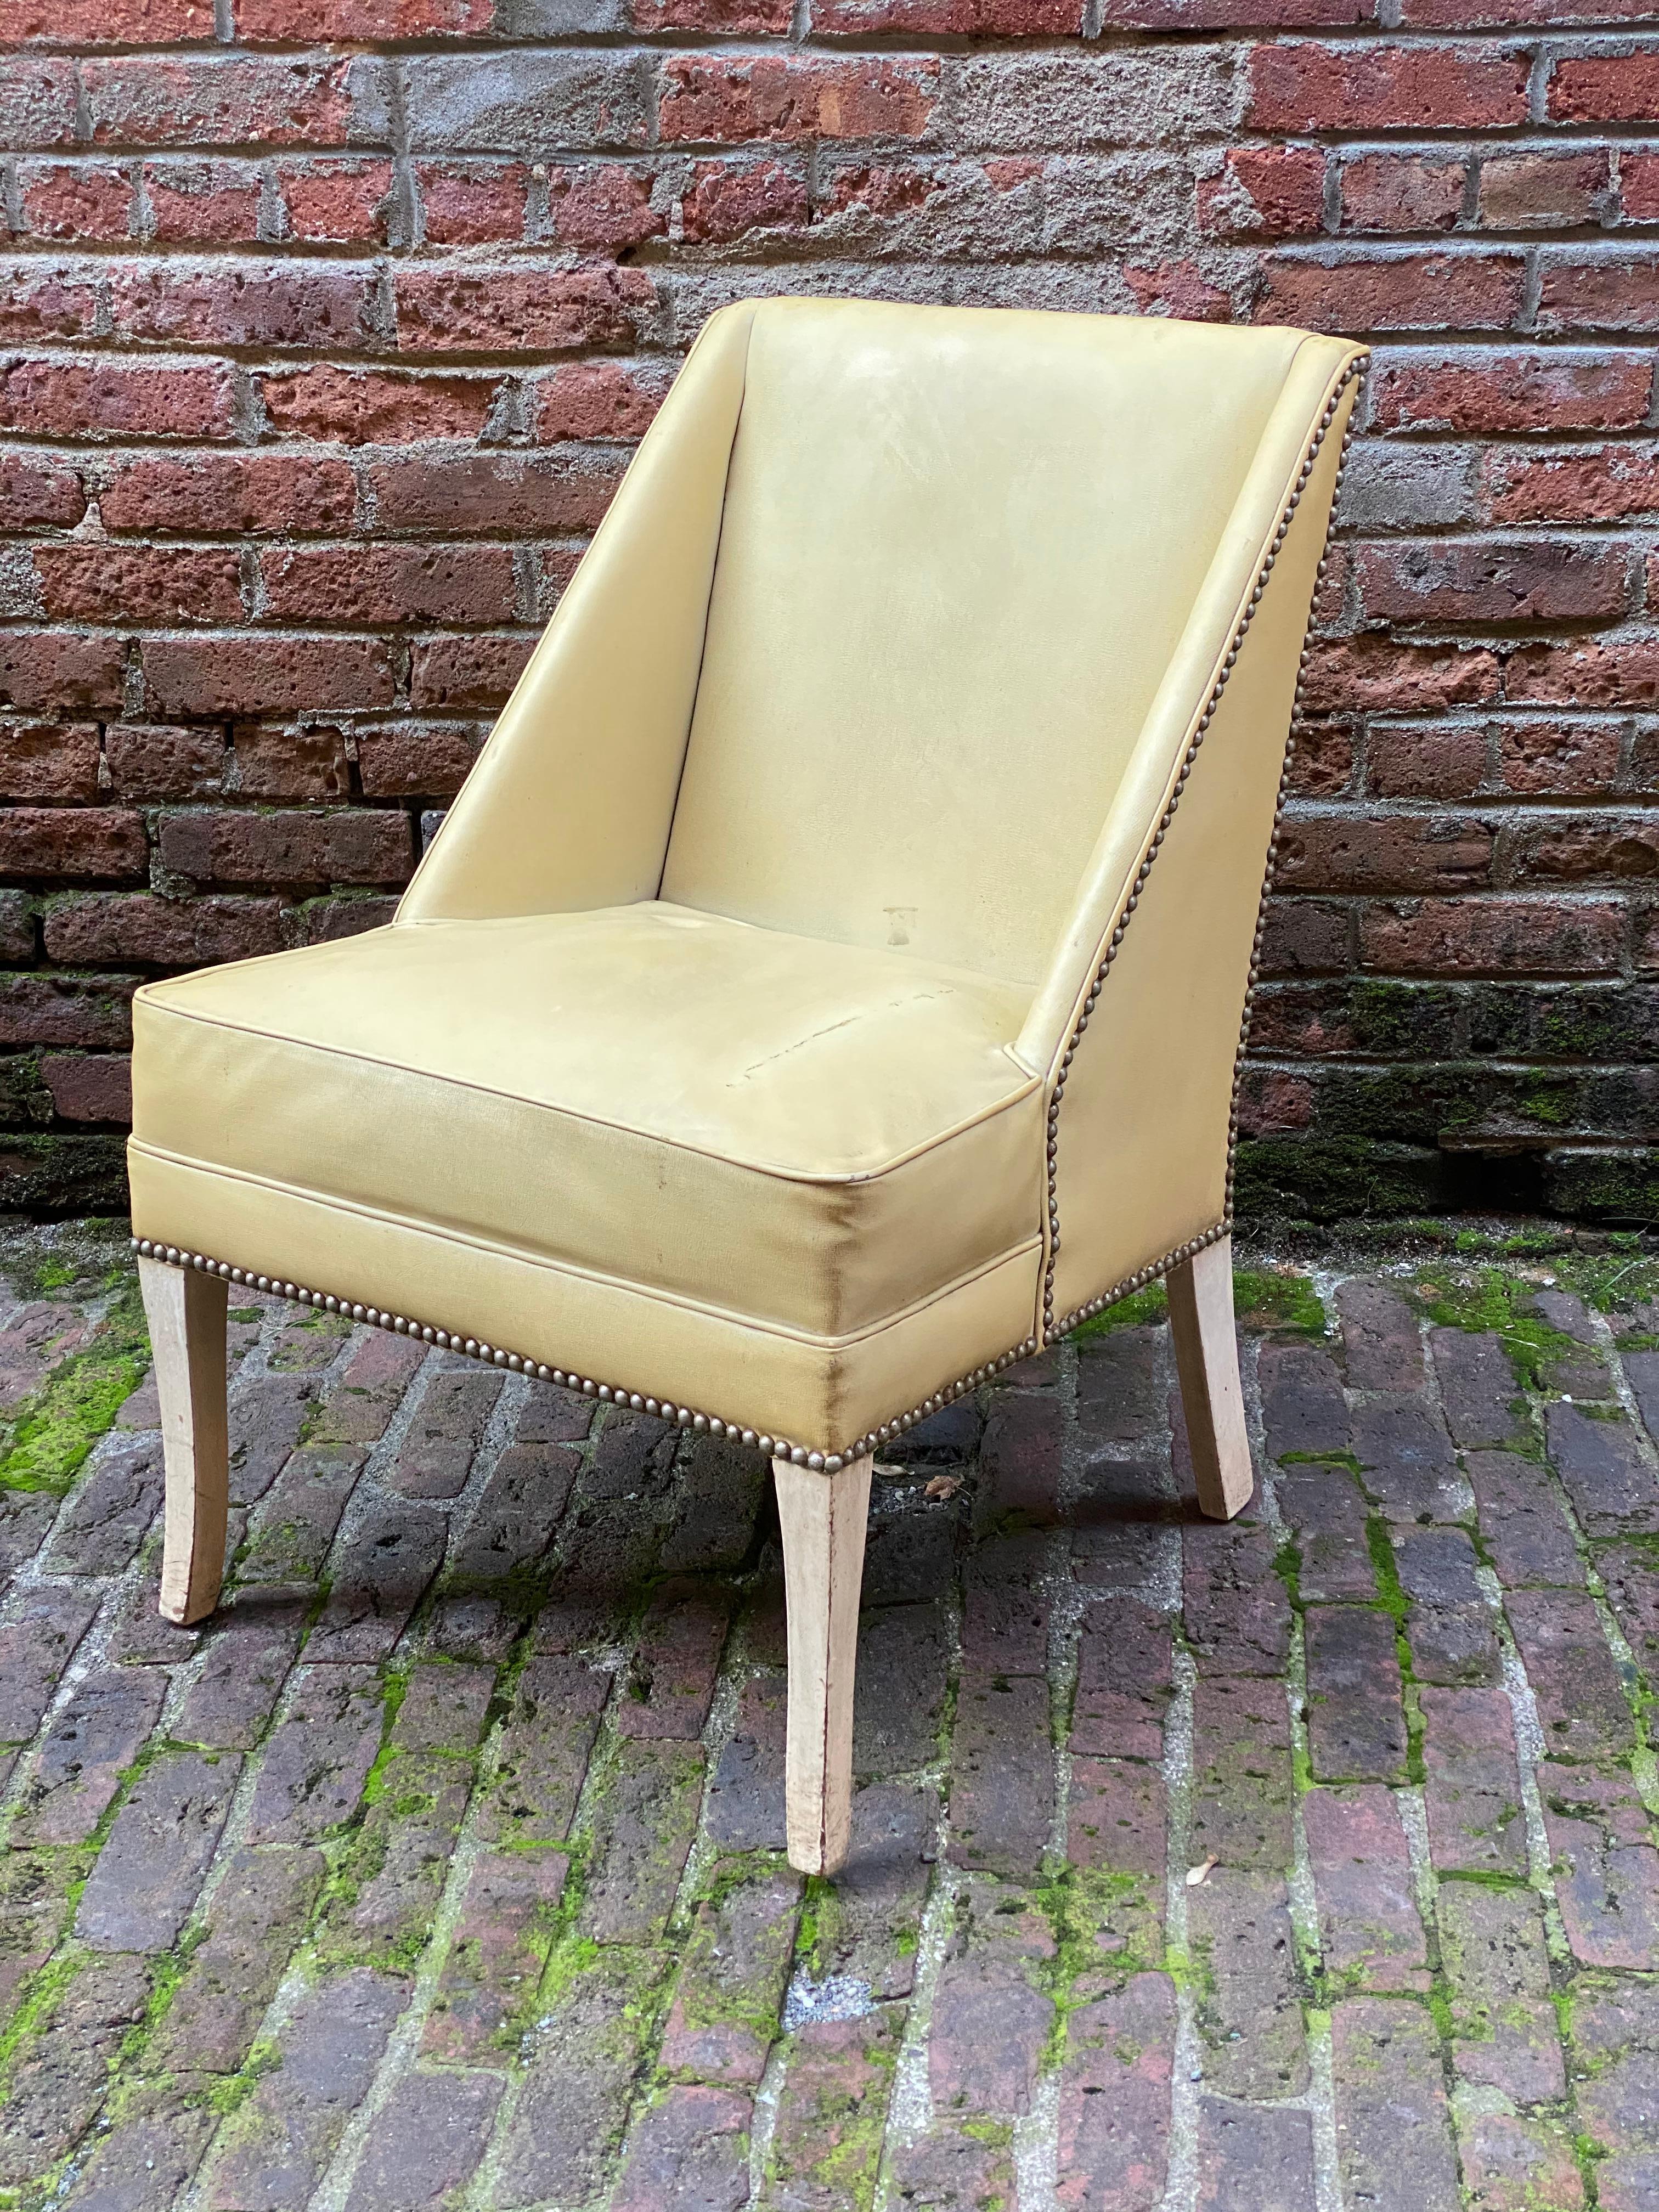 Elegant slipper chair, circa 1940-1950. Old off white vinyl upholstery with nice tacked edge detail. The frame is structurally sound and sturdy. Reupholstery is suggested, so you get to determine how beautiful one can make this chair. Overall wear,